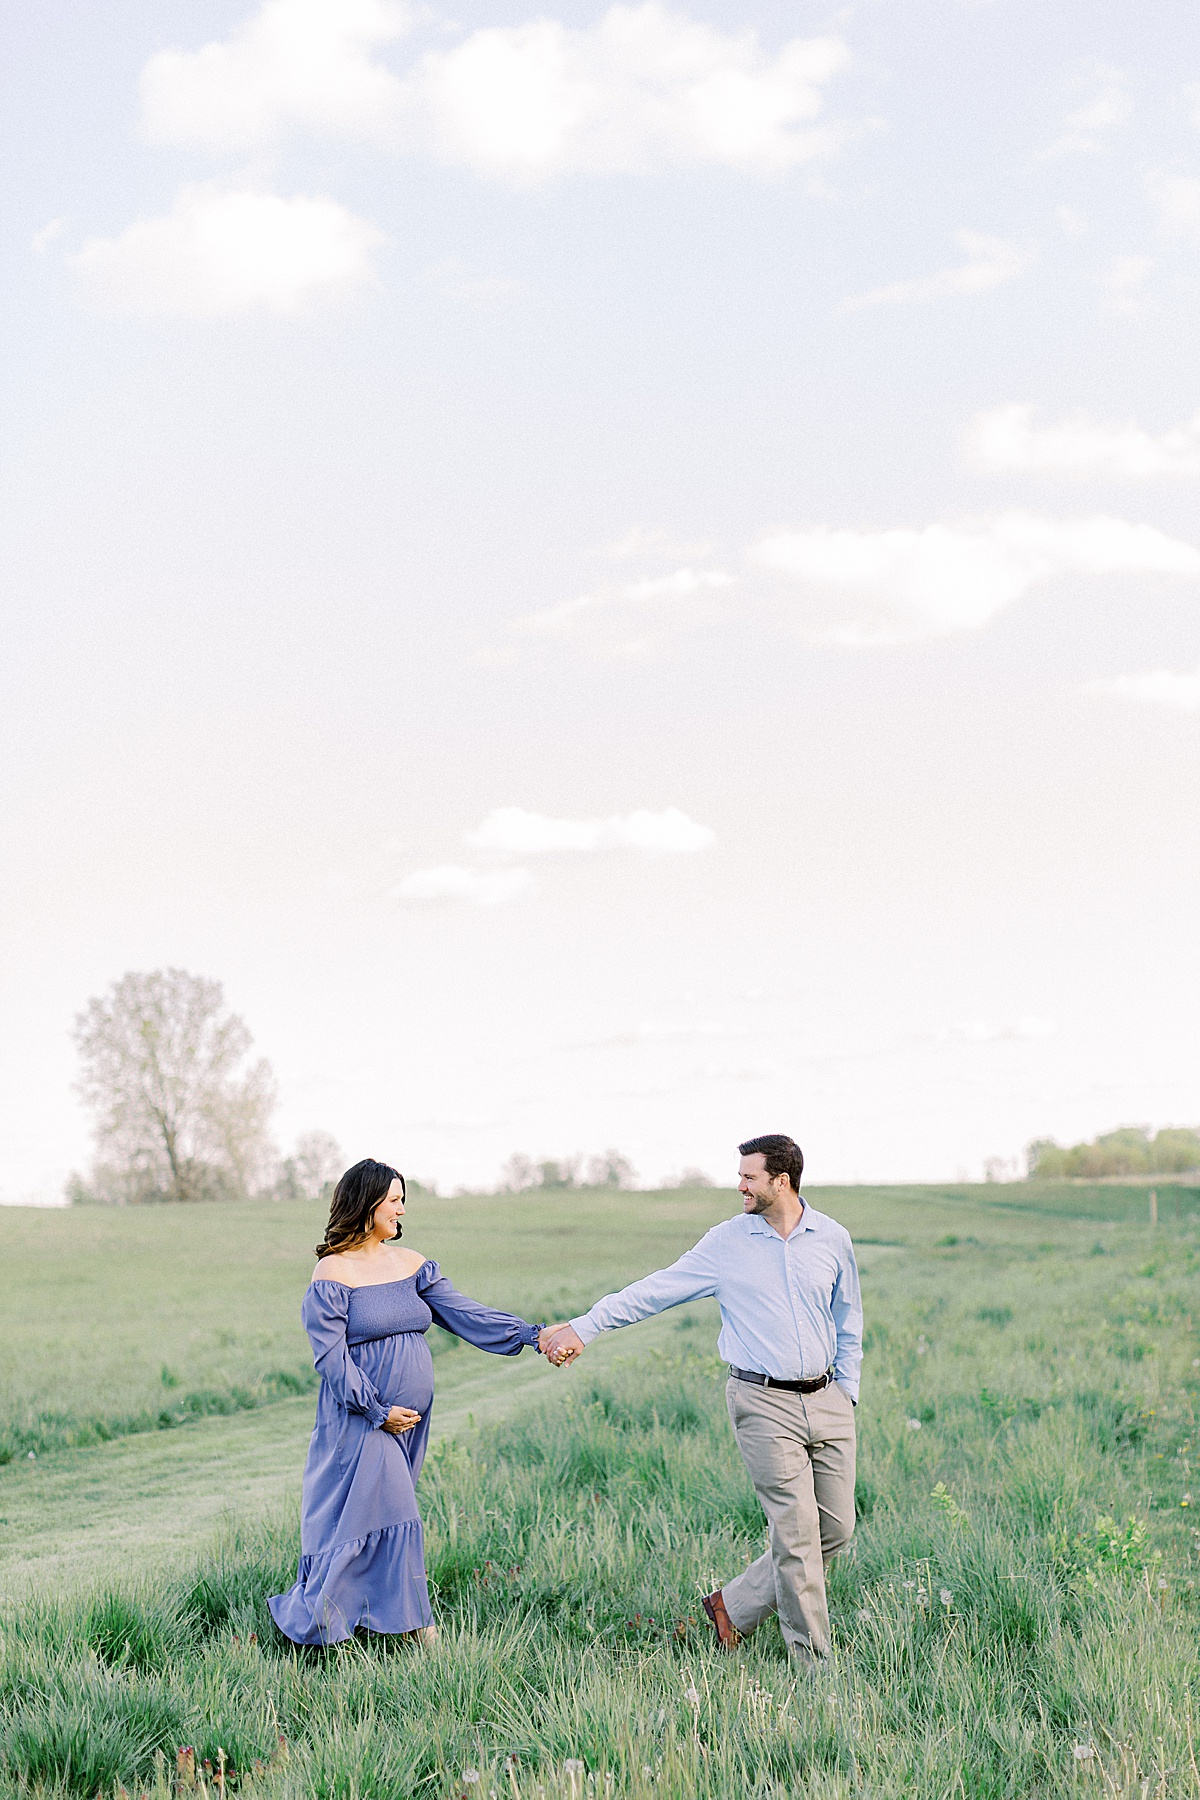 A couple walks hand in hand in an Indianapolis field.